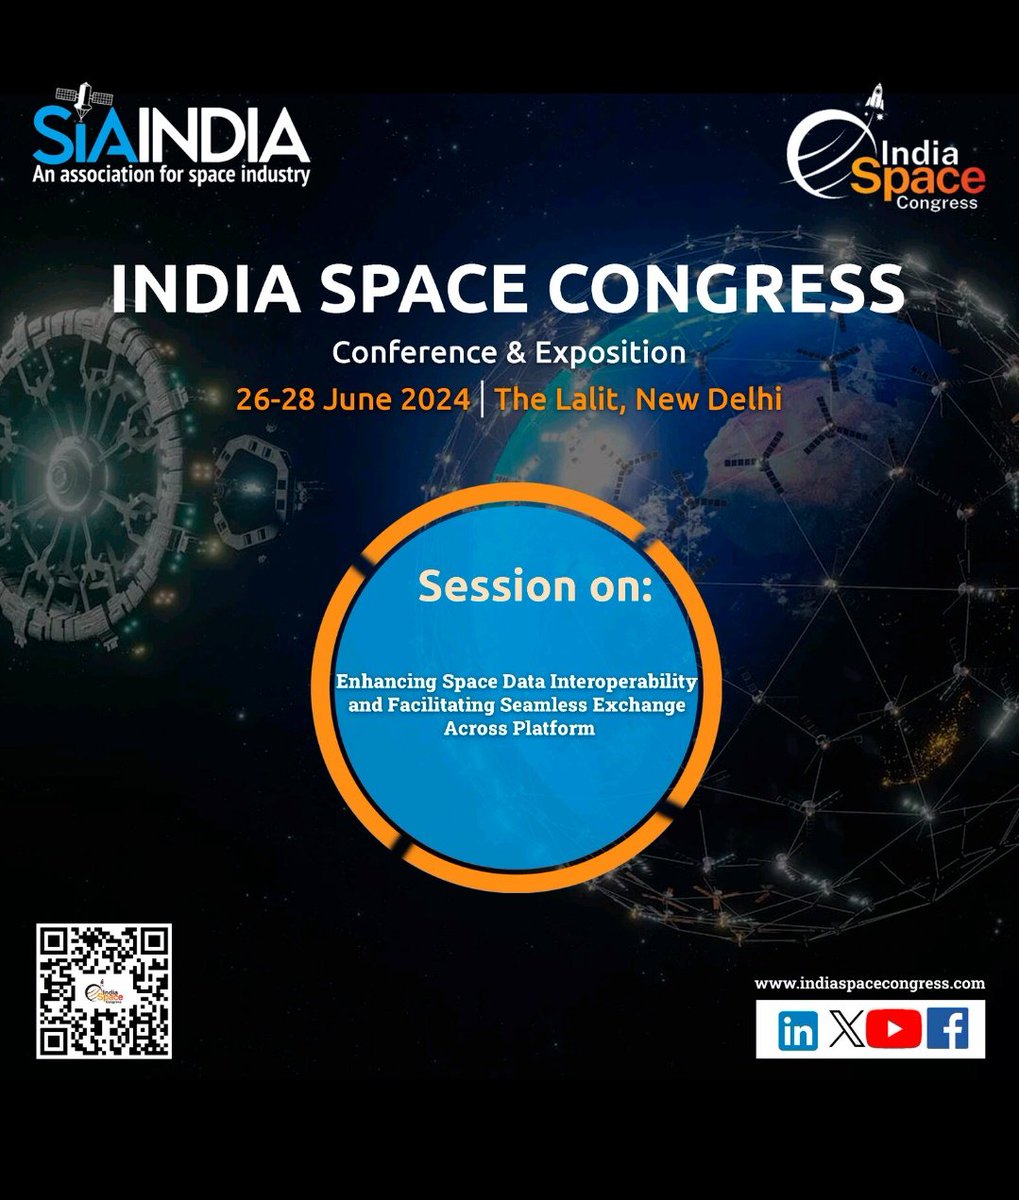 Join us at the India Space Congress from June 26th-28th, 2024, at The Lalit, New Delhi, to delve into a session focused on #Enhancing #Space #Data #Interoperability and Facilitating Seamless Exchange Across Platforms! visit: indiaspacecongress.com